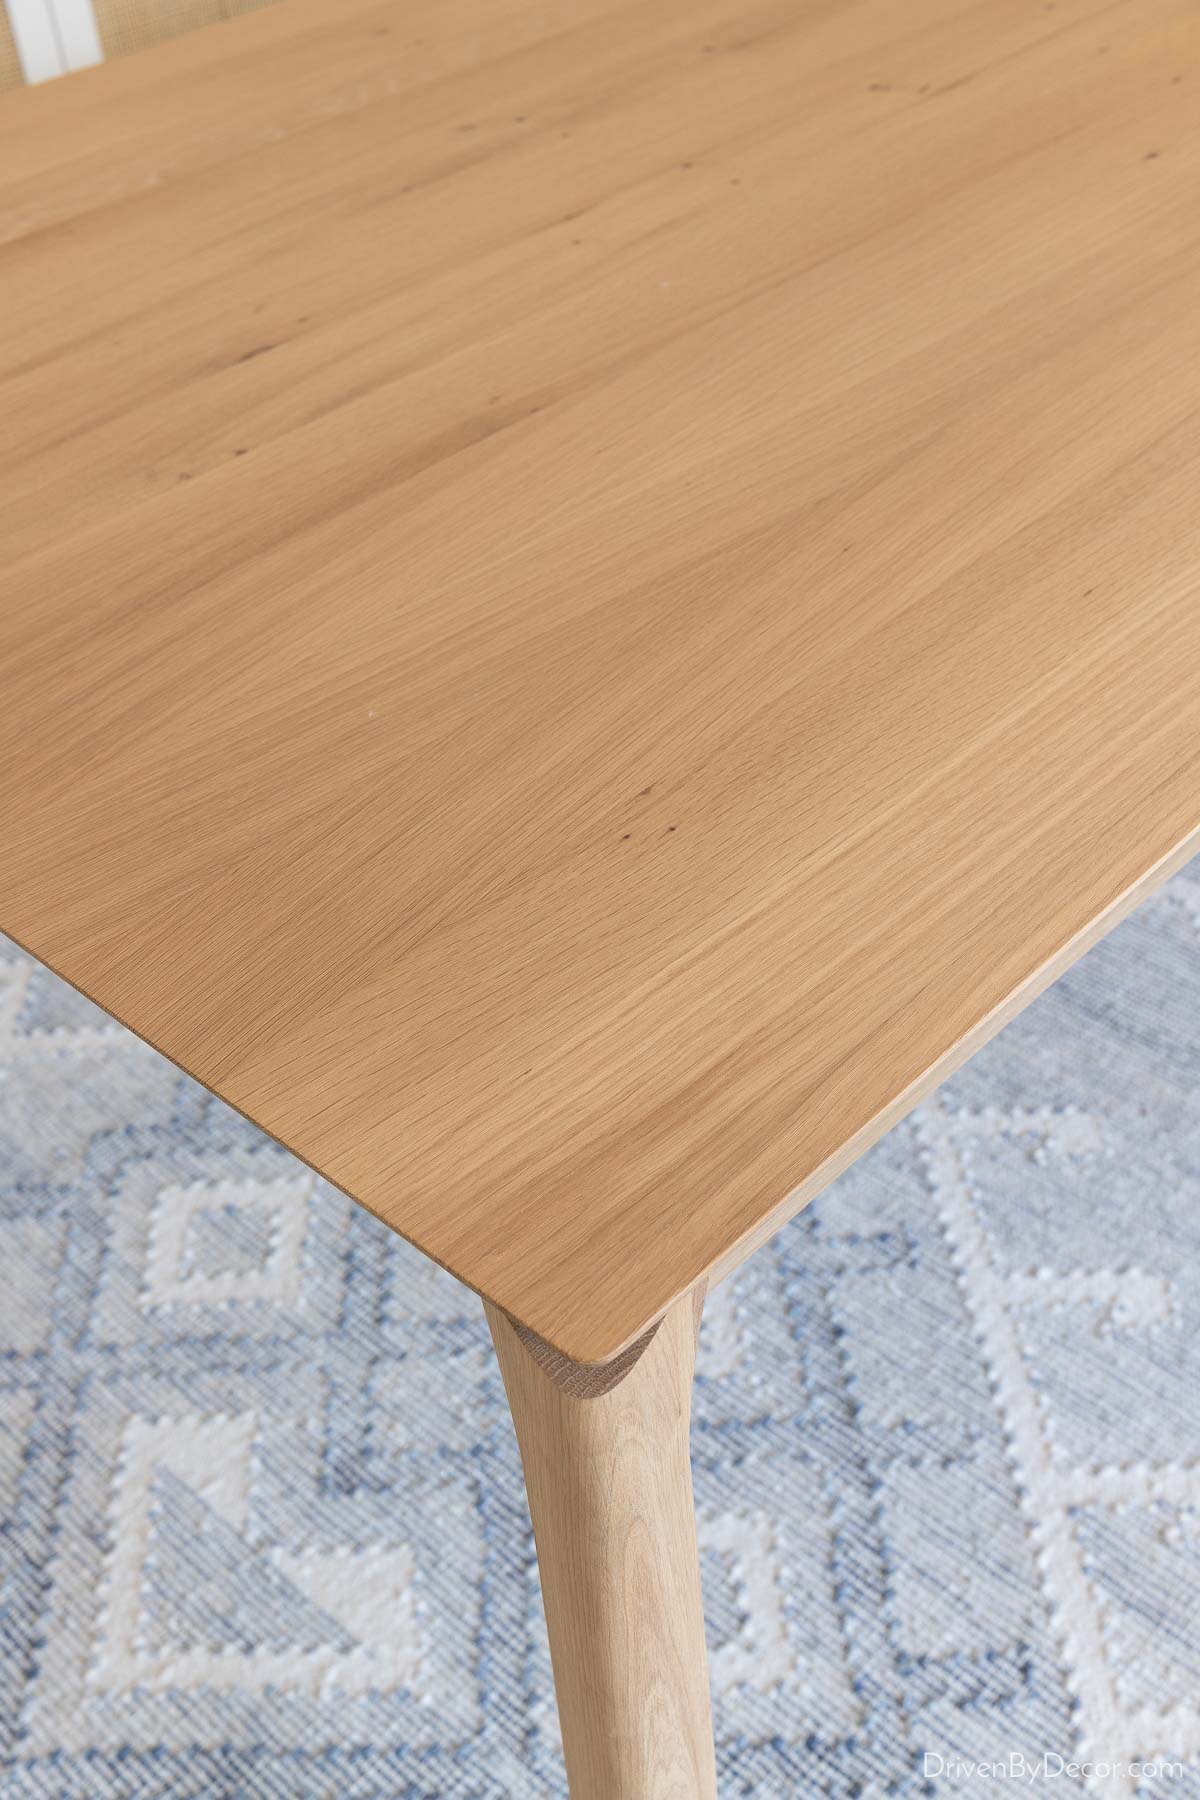 The finish of our oak dining table